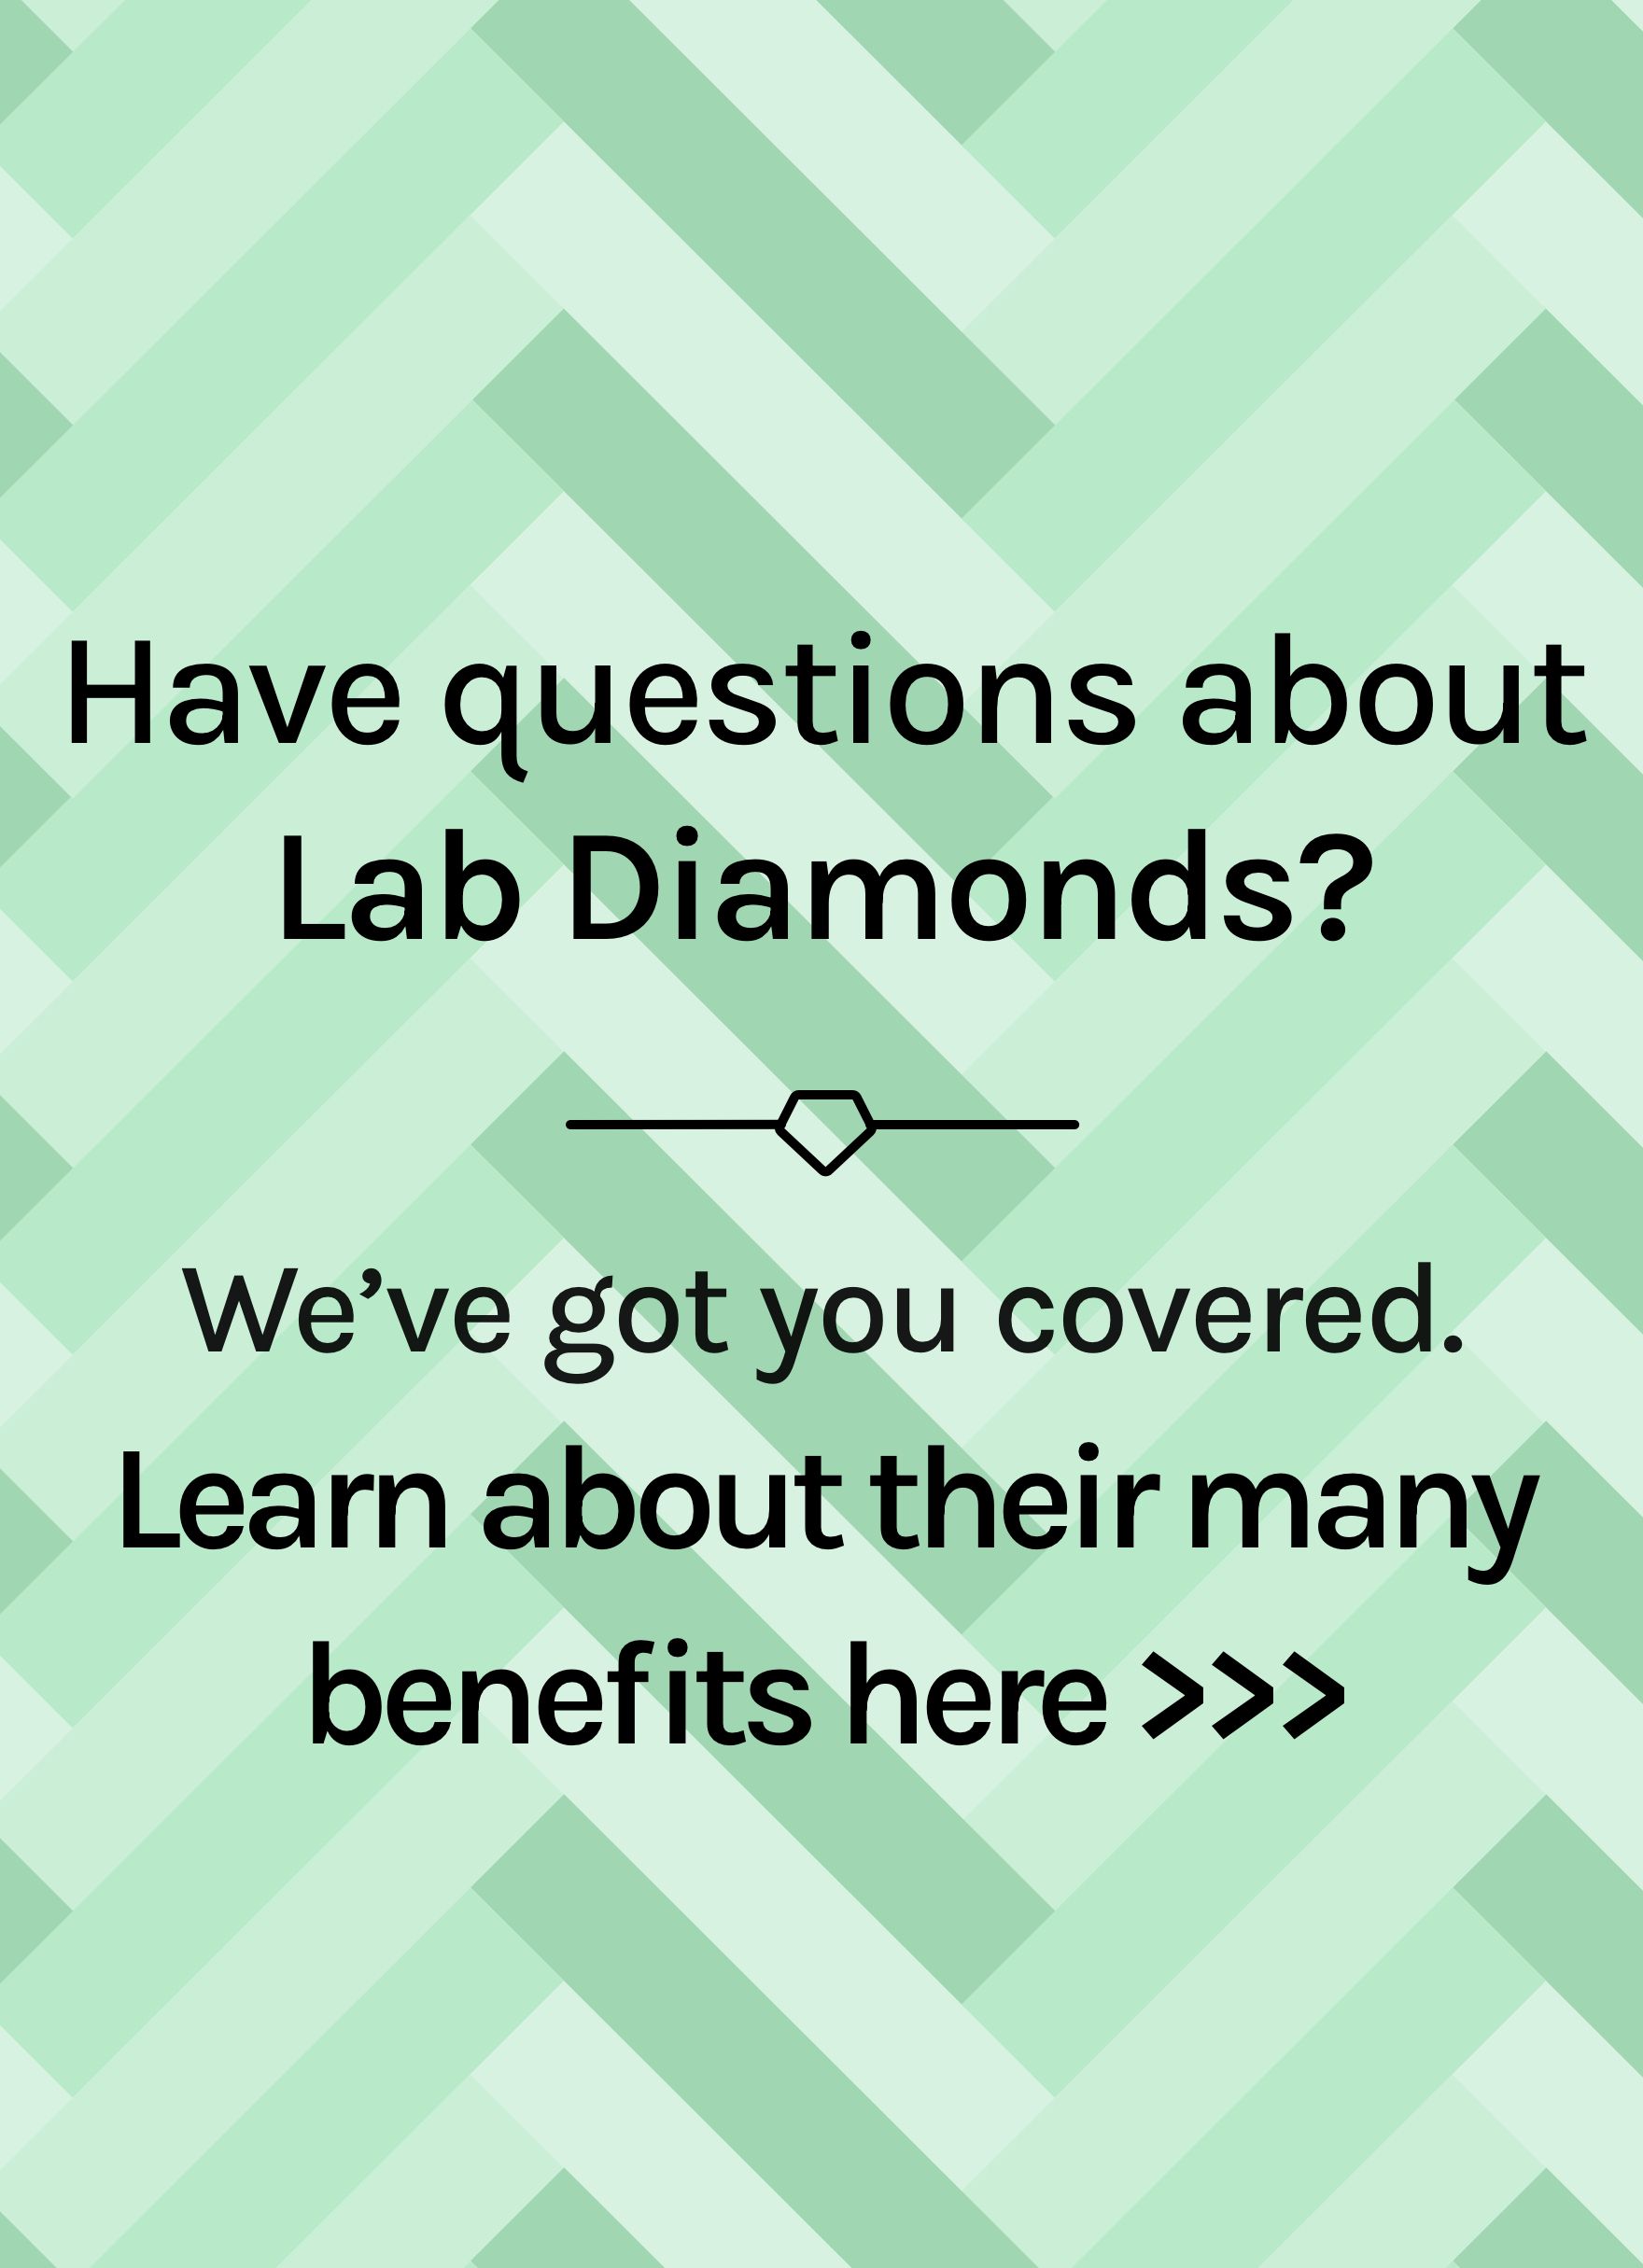 Have questions about Lab Diamonds? We've got you covered. Learn about their many benefits here.